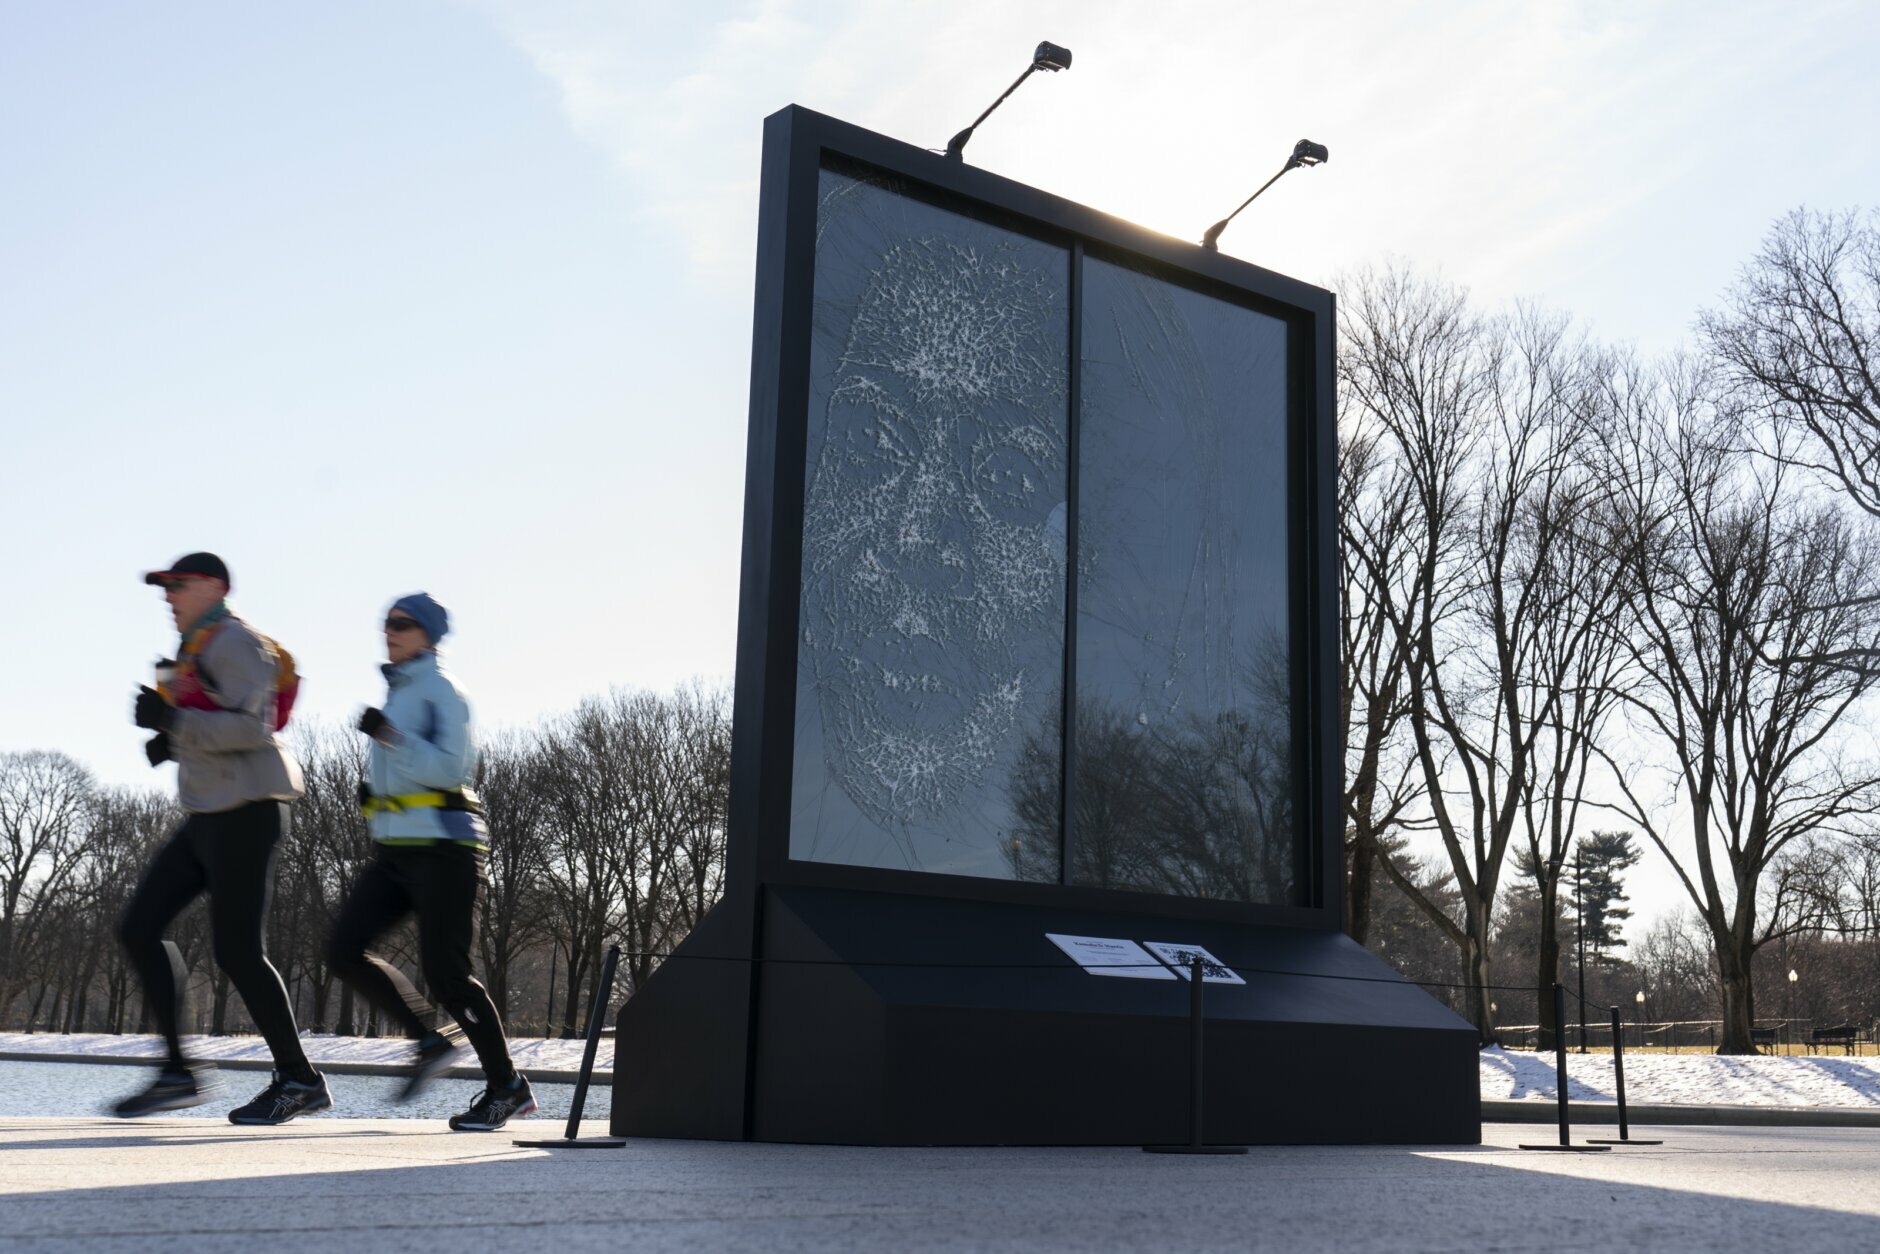 Joggers pass behind the installation "Vice President Kamala Harris Glass Ceiling Breaker" at the Lincoln Memorial in Washington, Wednesday, Feb. 4, 2021. Vice President Kamala Harris' barrier-breaking career has been memorialized in a portrait depicting her face emerging from the cracks in a massive sheet of glass. Using a photo of Harris that taken by photographer Celeste Sloman, artist Simon Berger lightly hammered on the slab of laminated glass to create the portrait of Harris. (AP Photo/Carolyn Kaster)